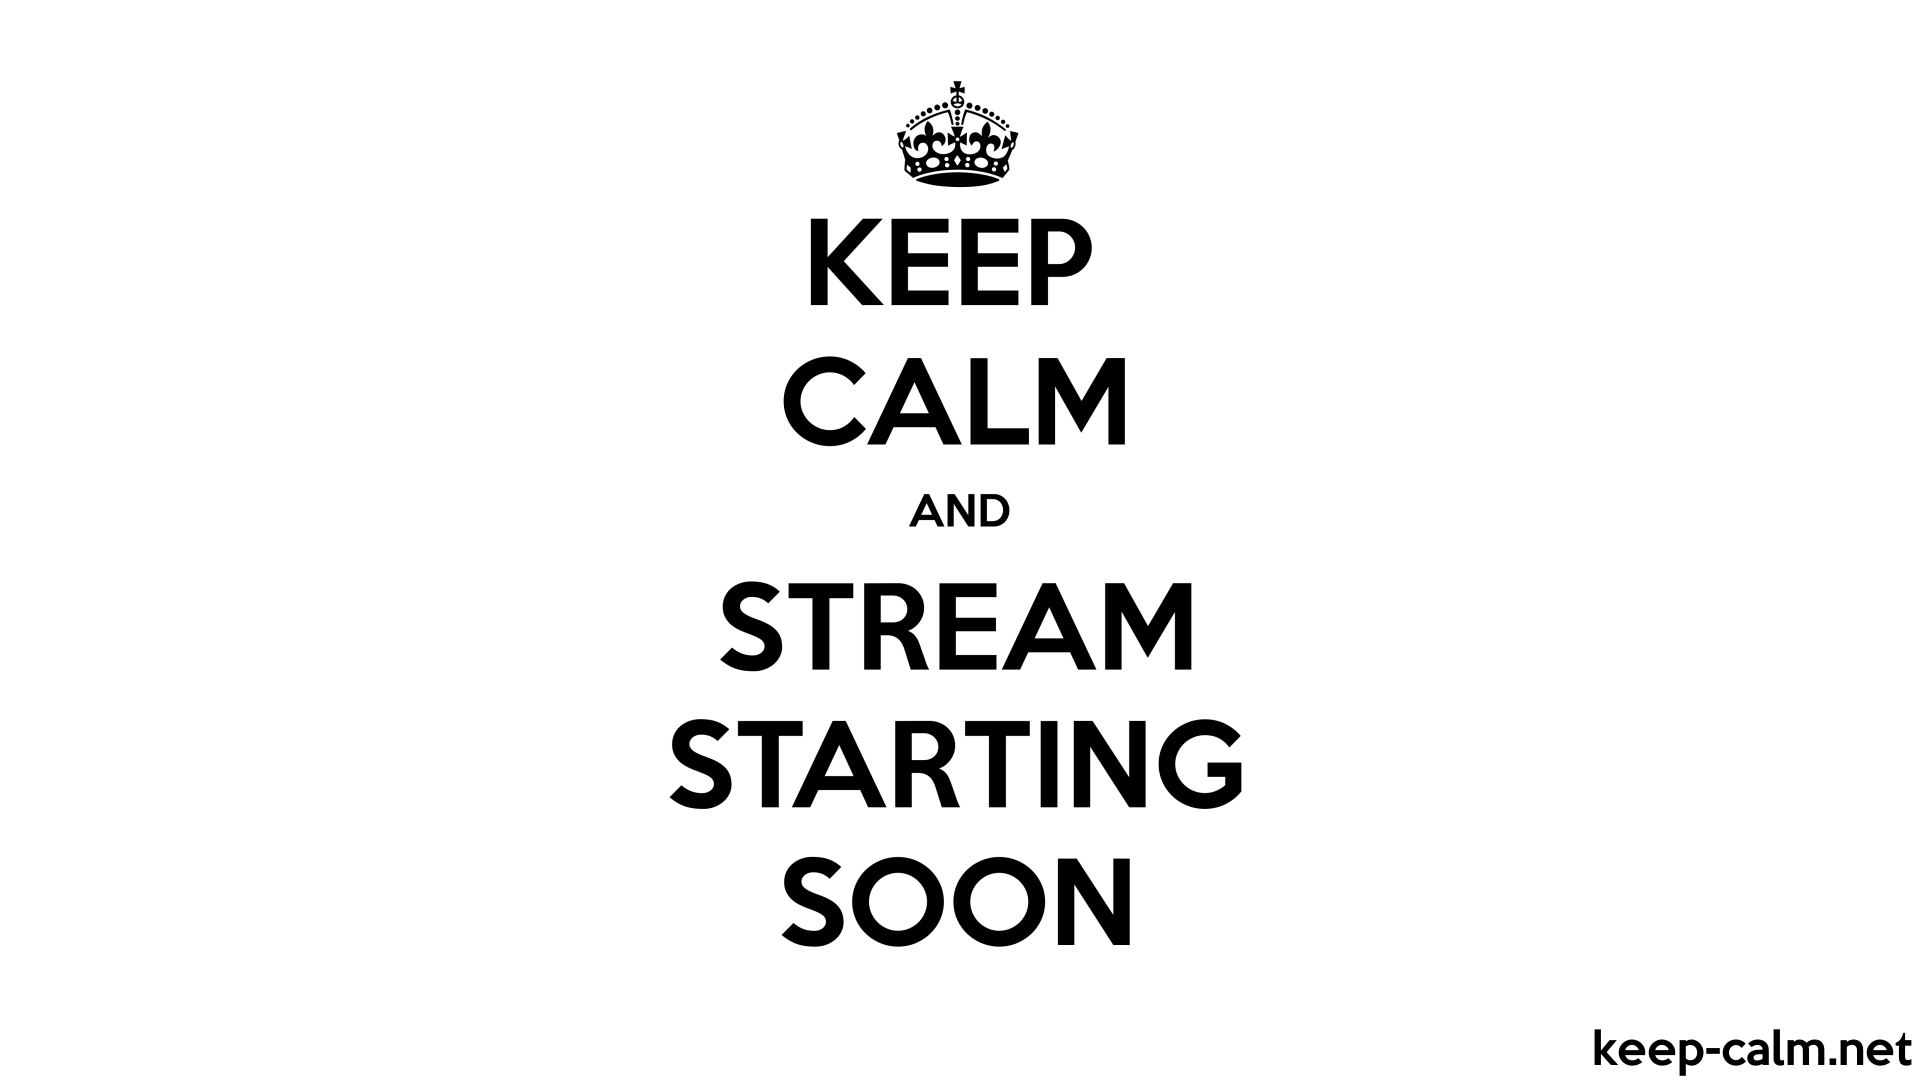 KEEP CALM AND STREAM STARTING SOON